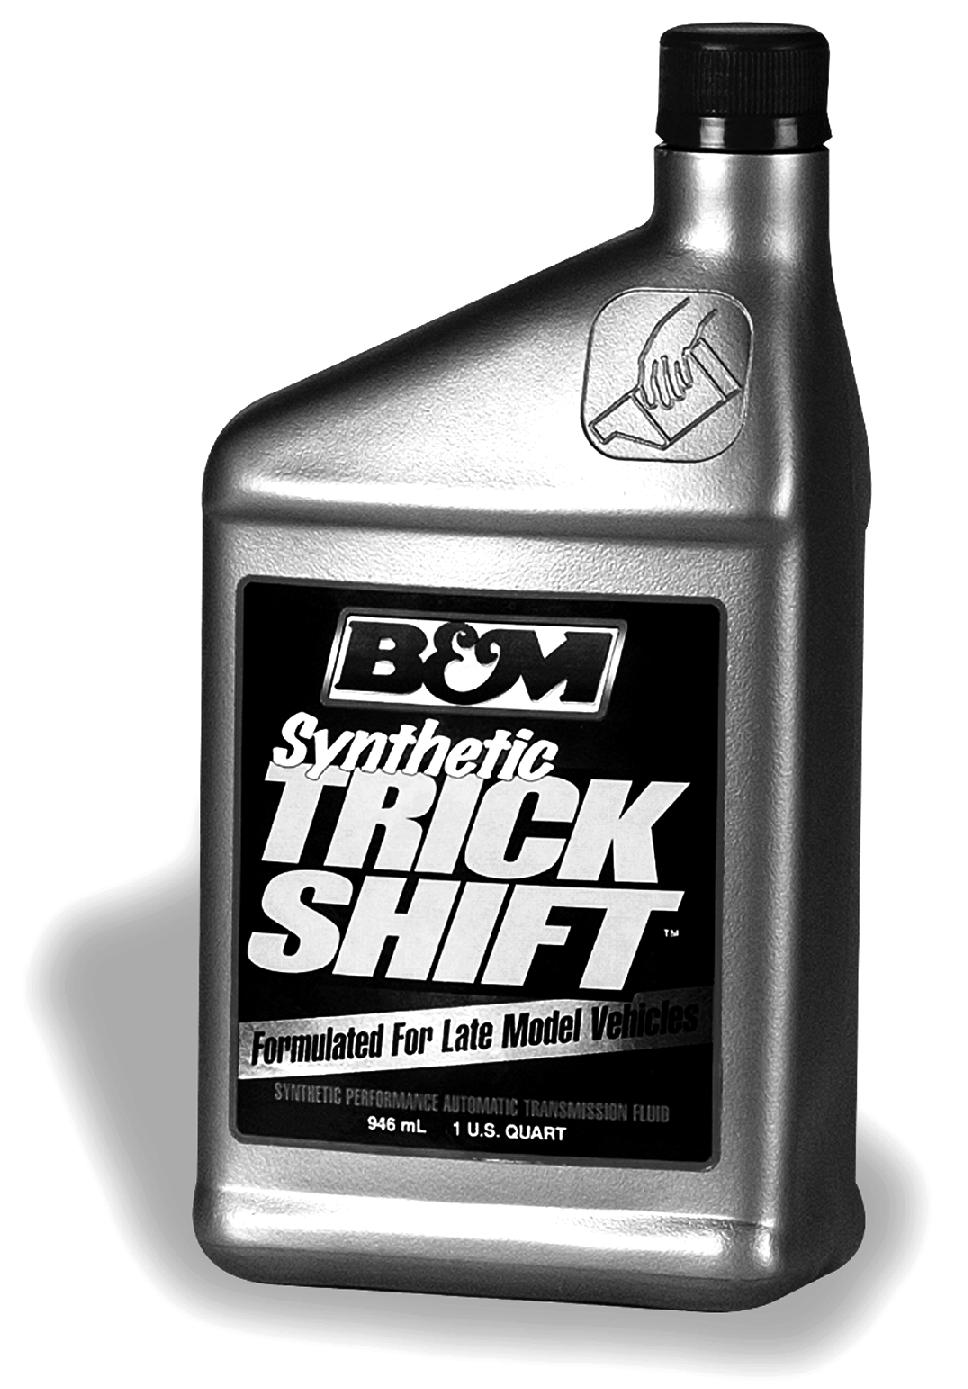 Synthetic Trick Shift Performance ATF s Synthetic Trick Shift is suitable for all automatic transmissions including late model electronic controlled transmissions.